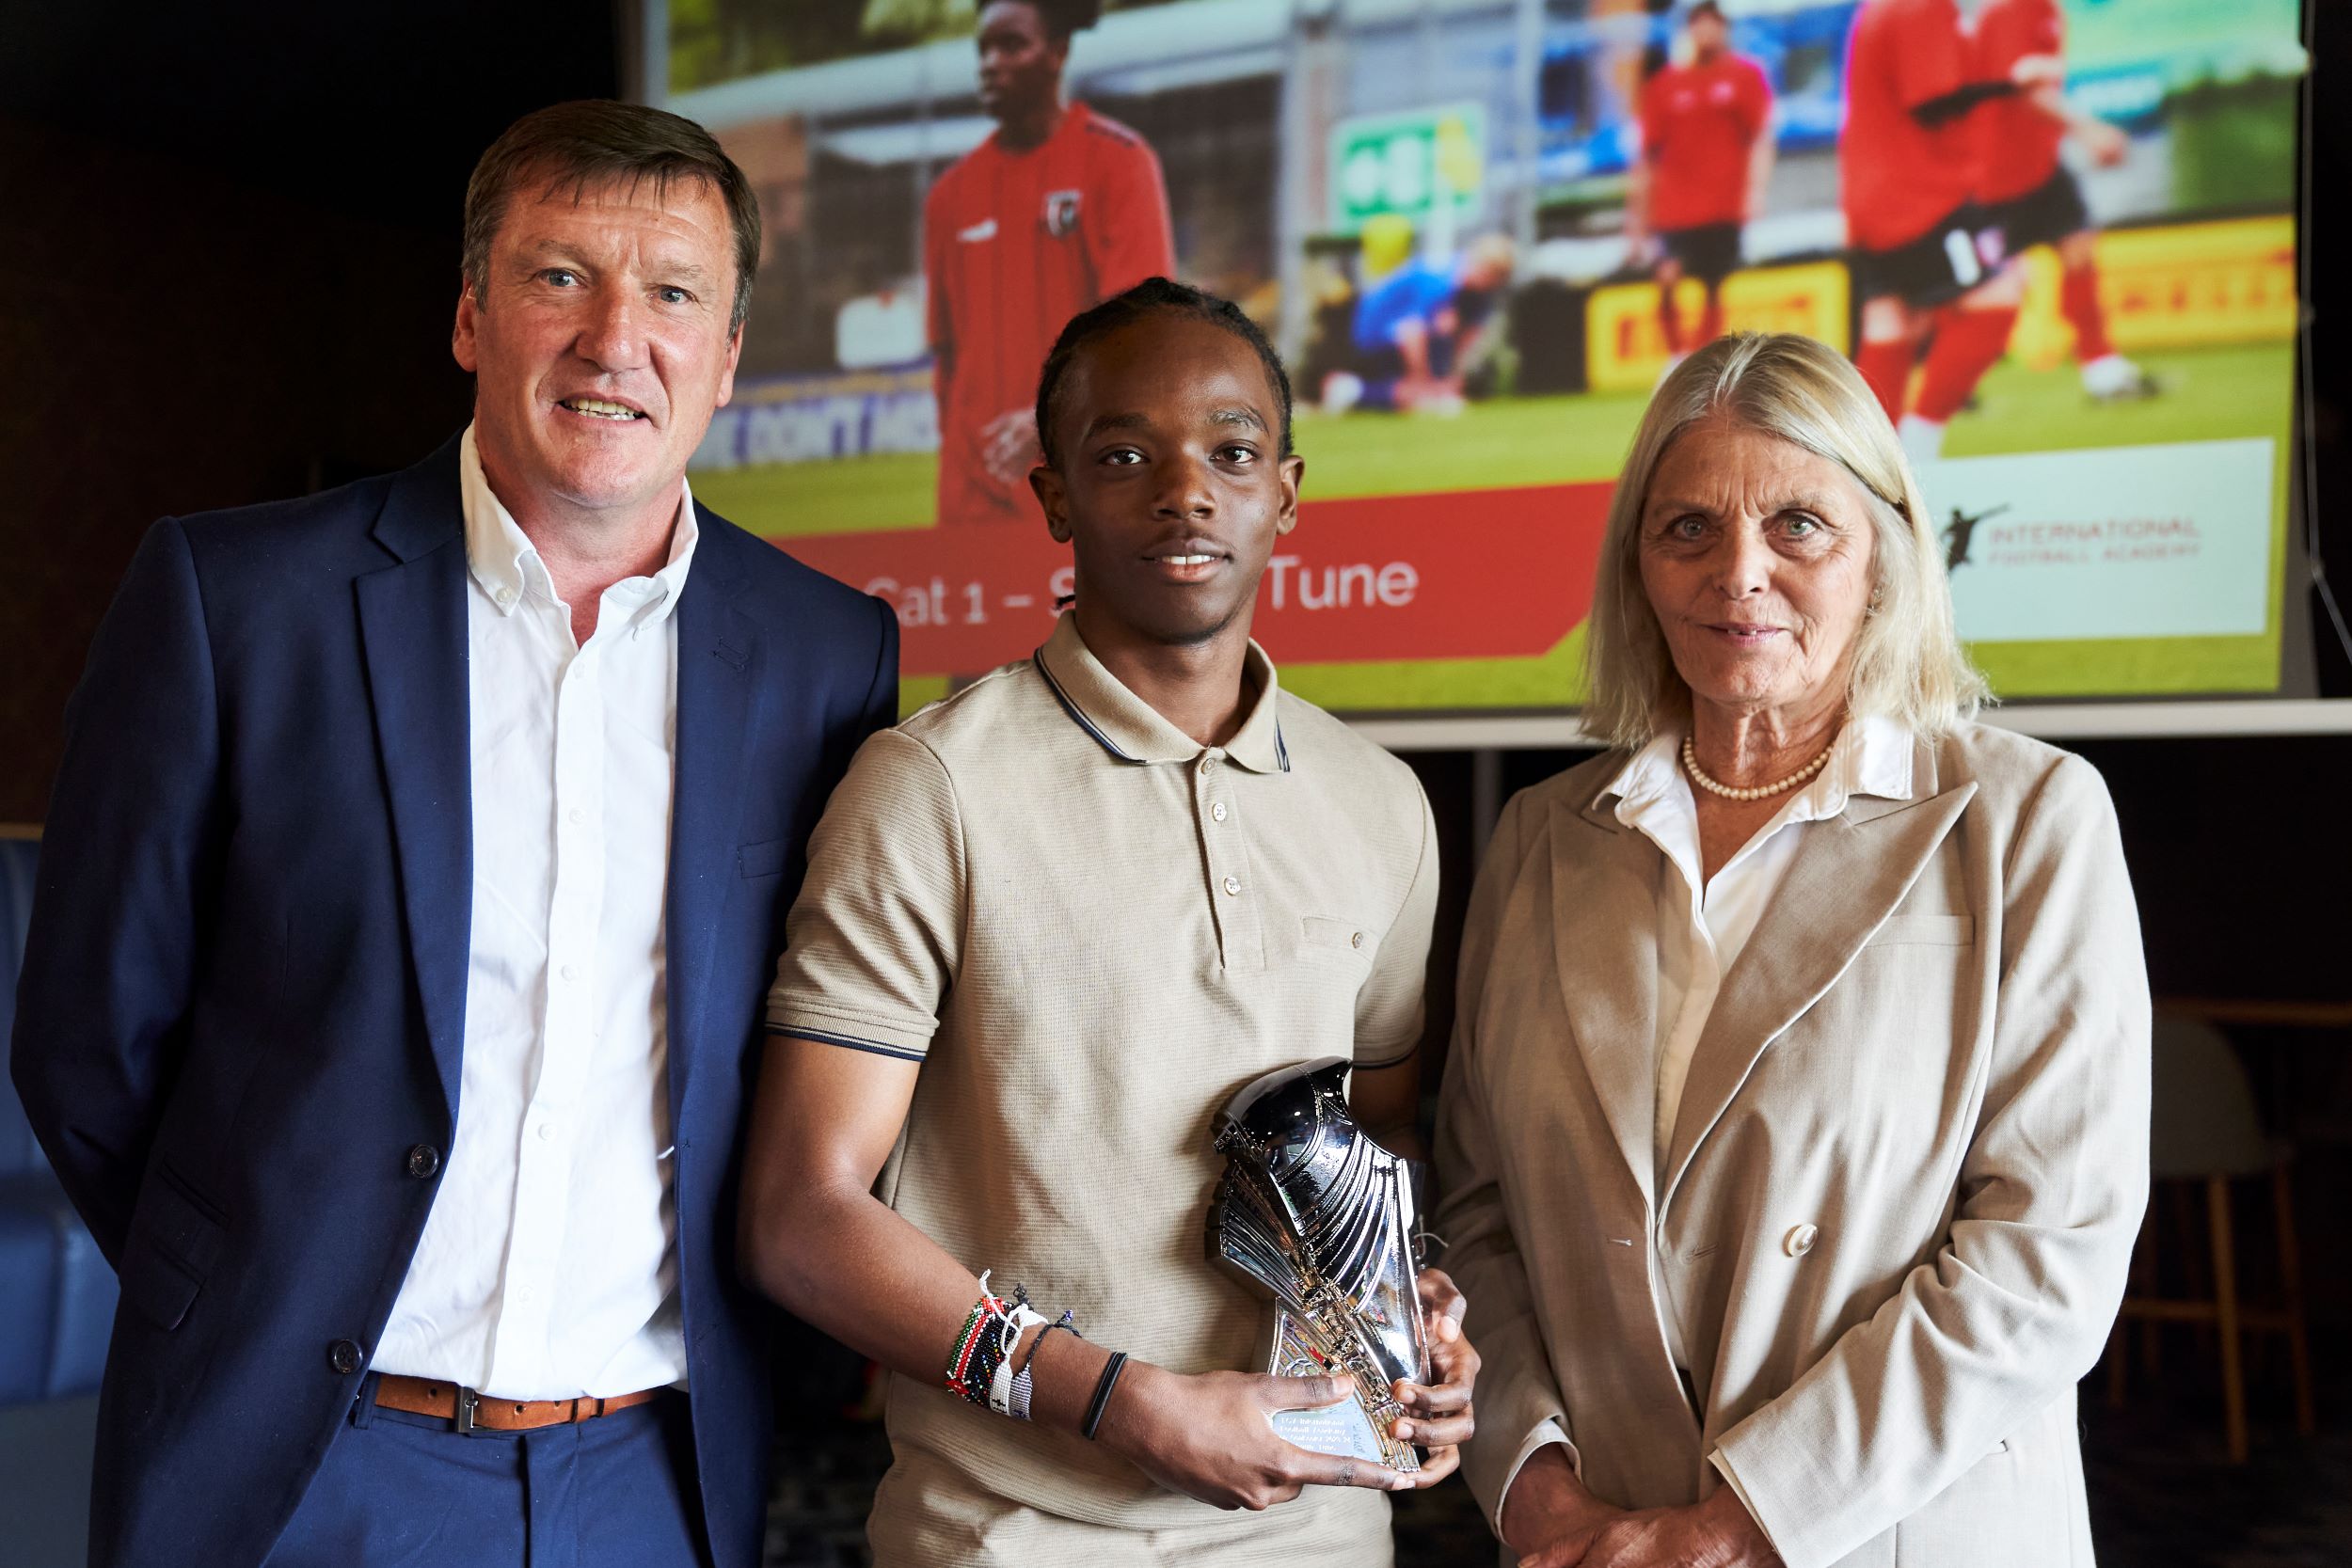 FCV's Top Goalscorer receiving his award, alongside CEO Ann Dyte and Head of Football Grant Brown.